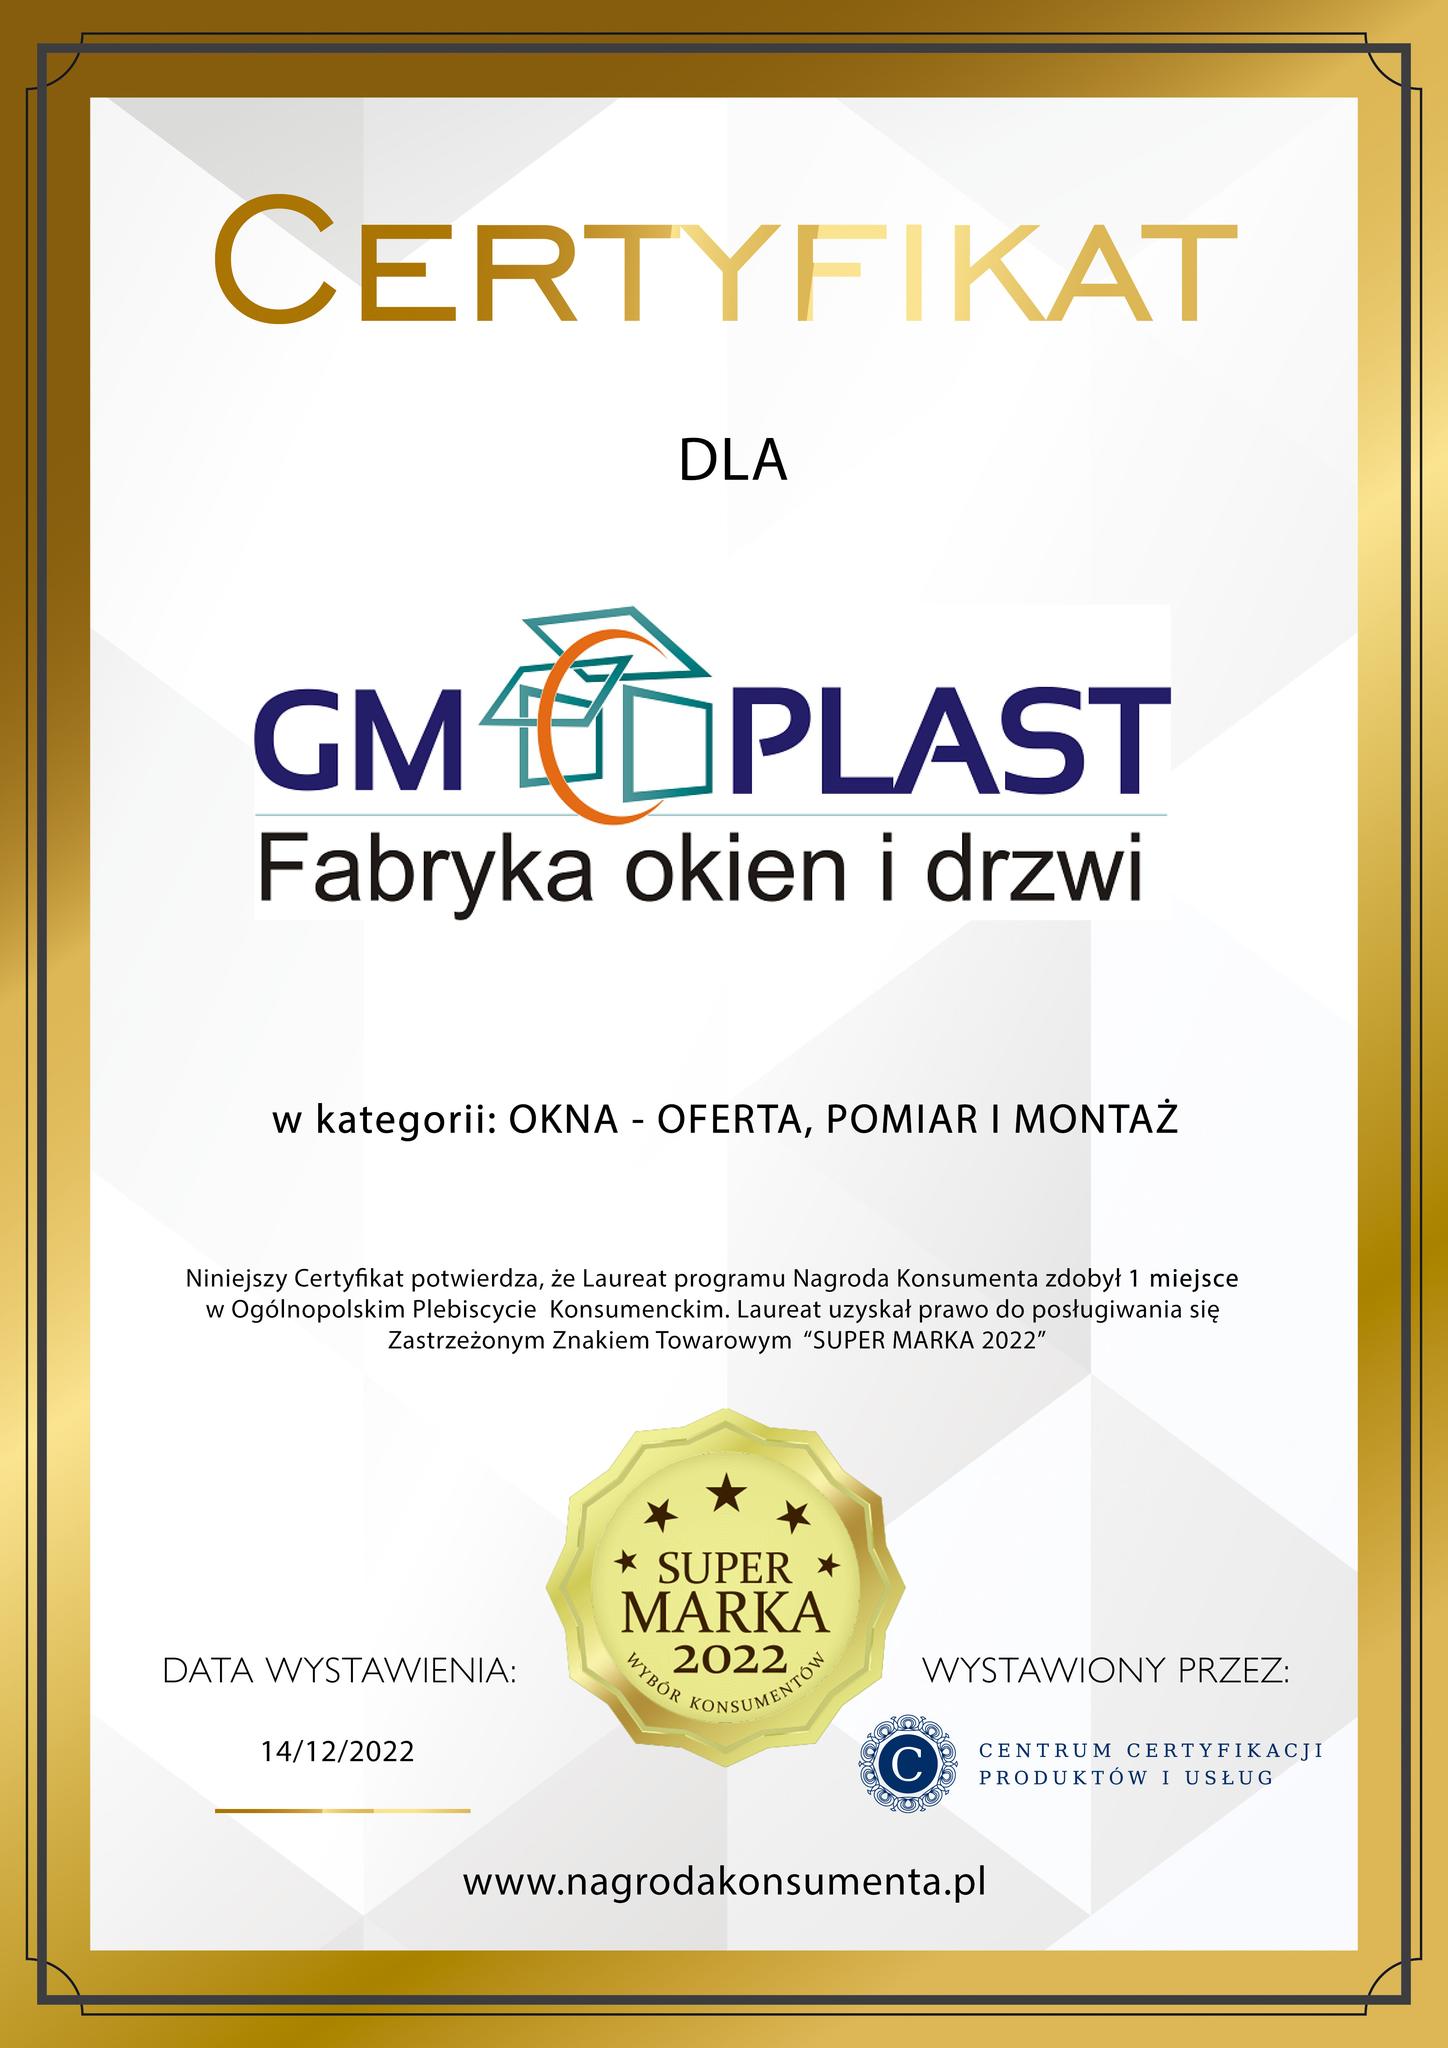 GM PLAST BRAND OF THE YEAR CERTIFICATE